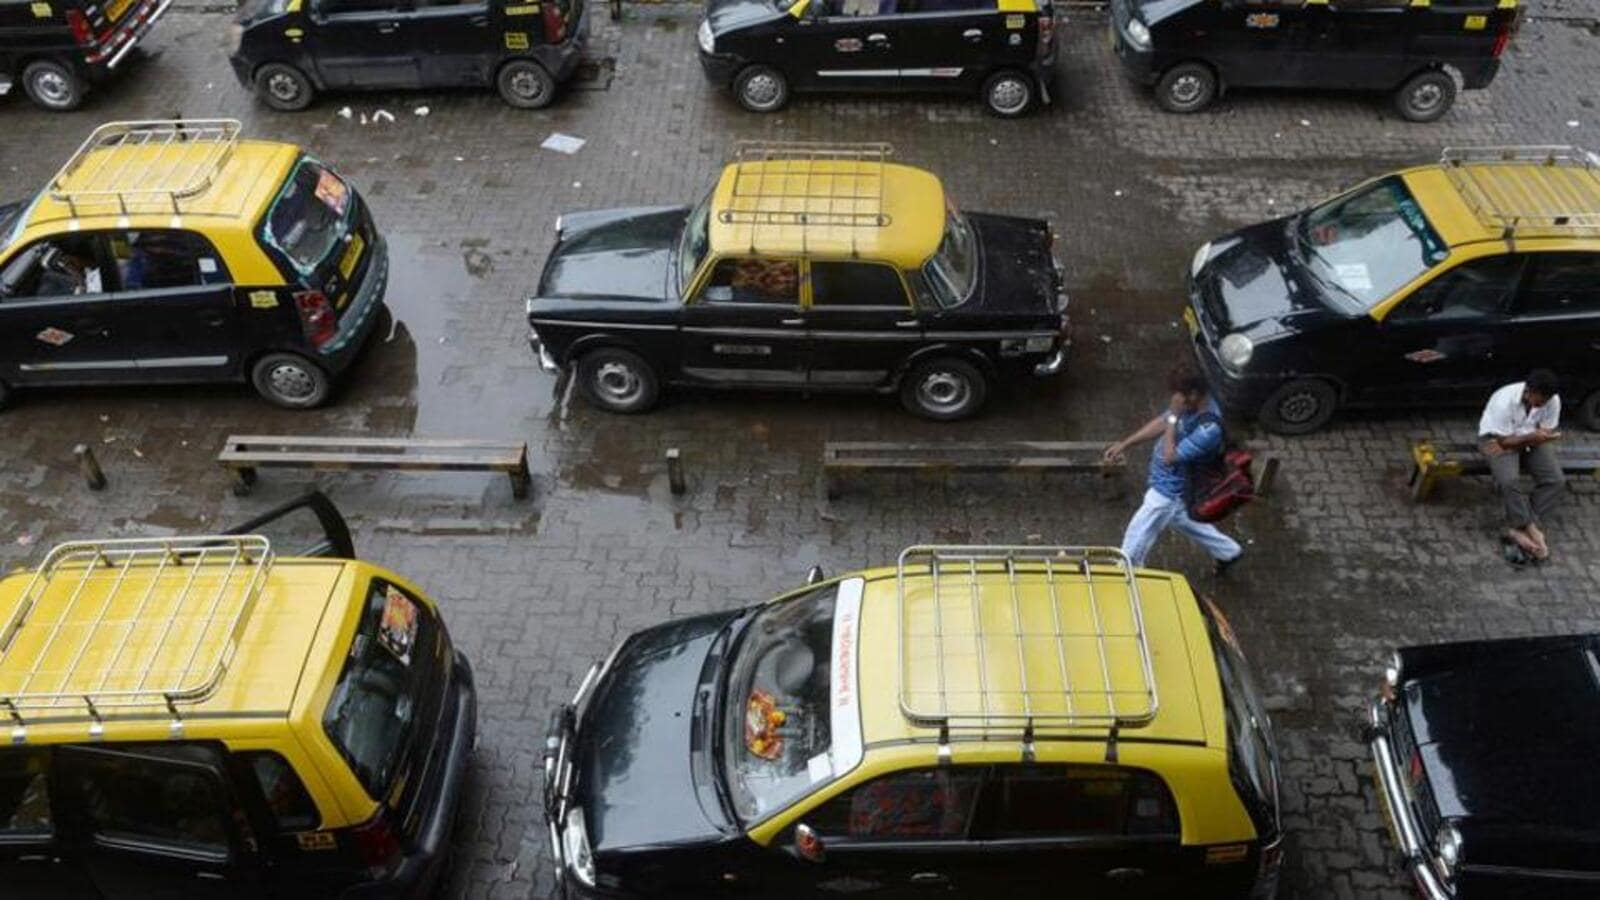 Mumbai auto, taxi fare hike notified by govt, effective from October 1